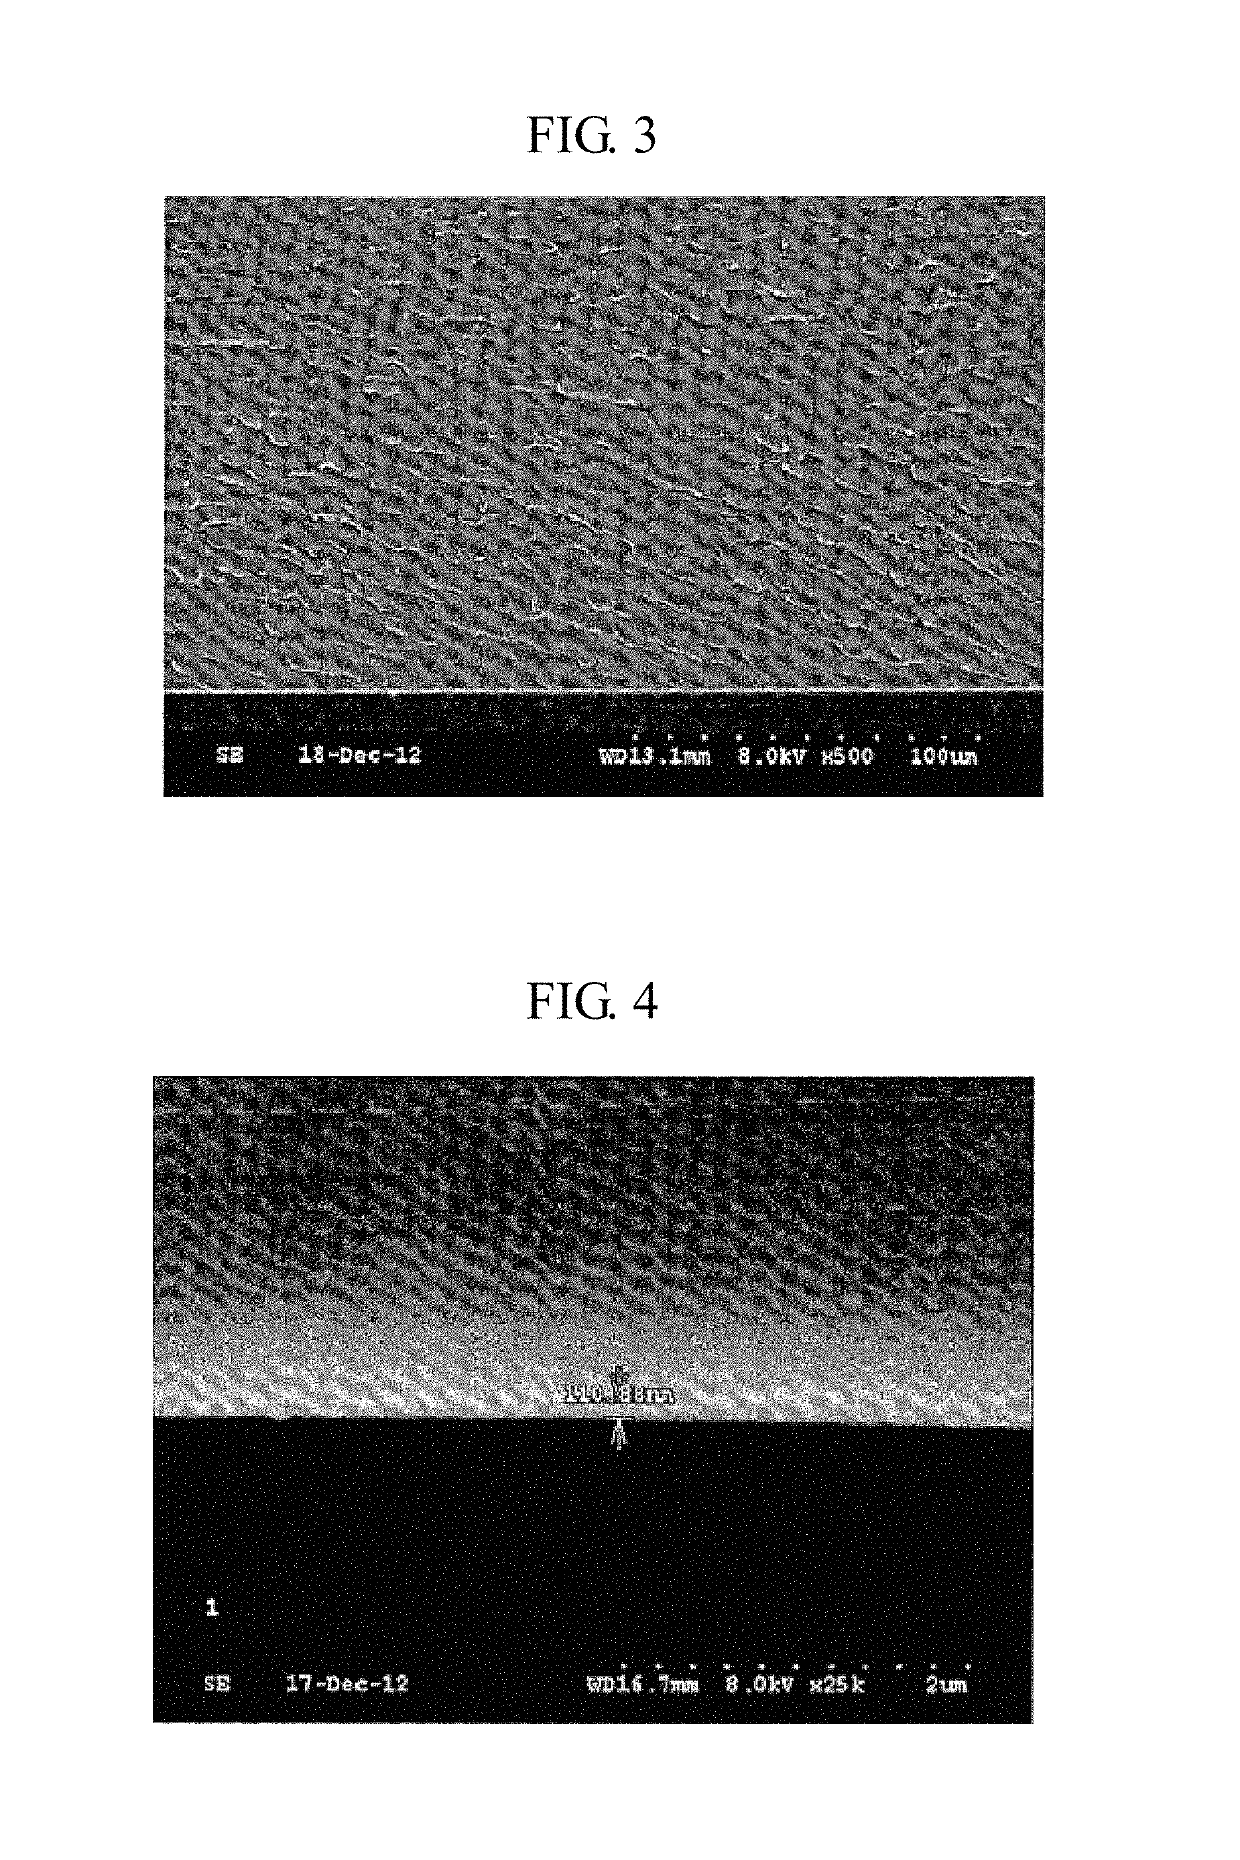 Hydrogel contact lens having wet surface, and manufacturing method therefor